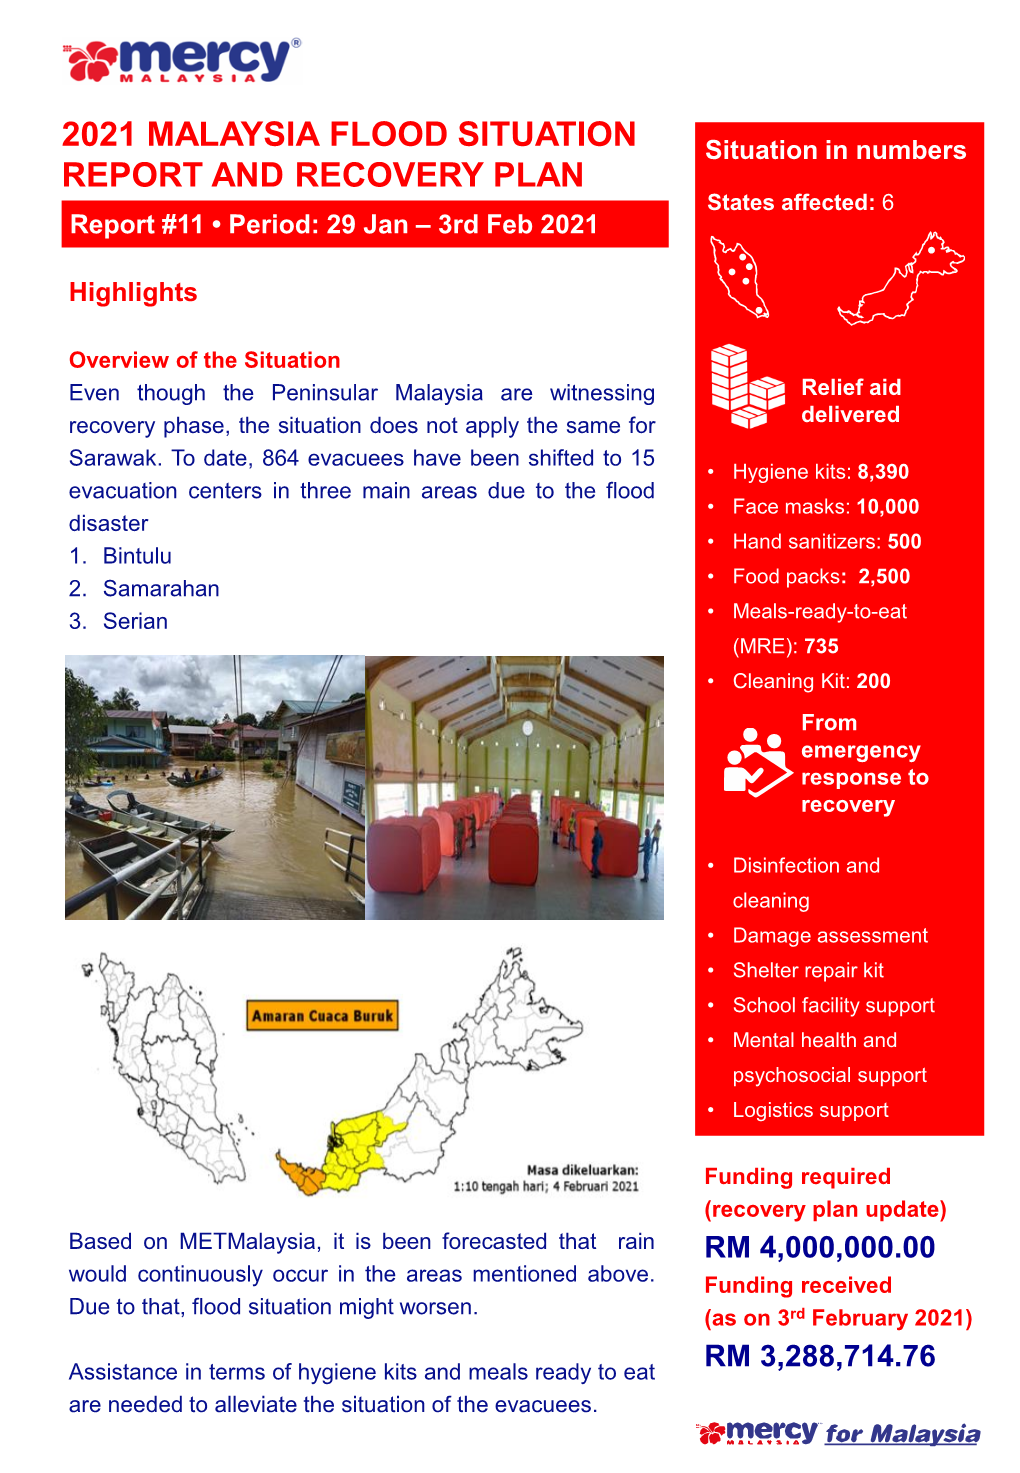 2021 Malaysia Flood Situation Report and Recovery Plan